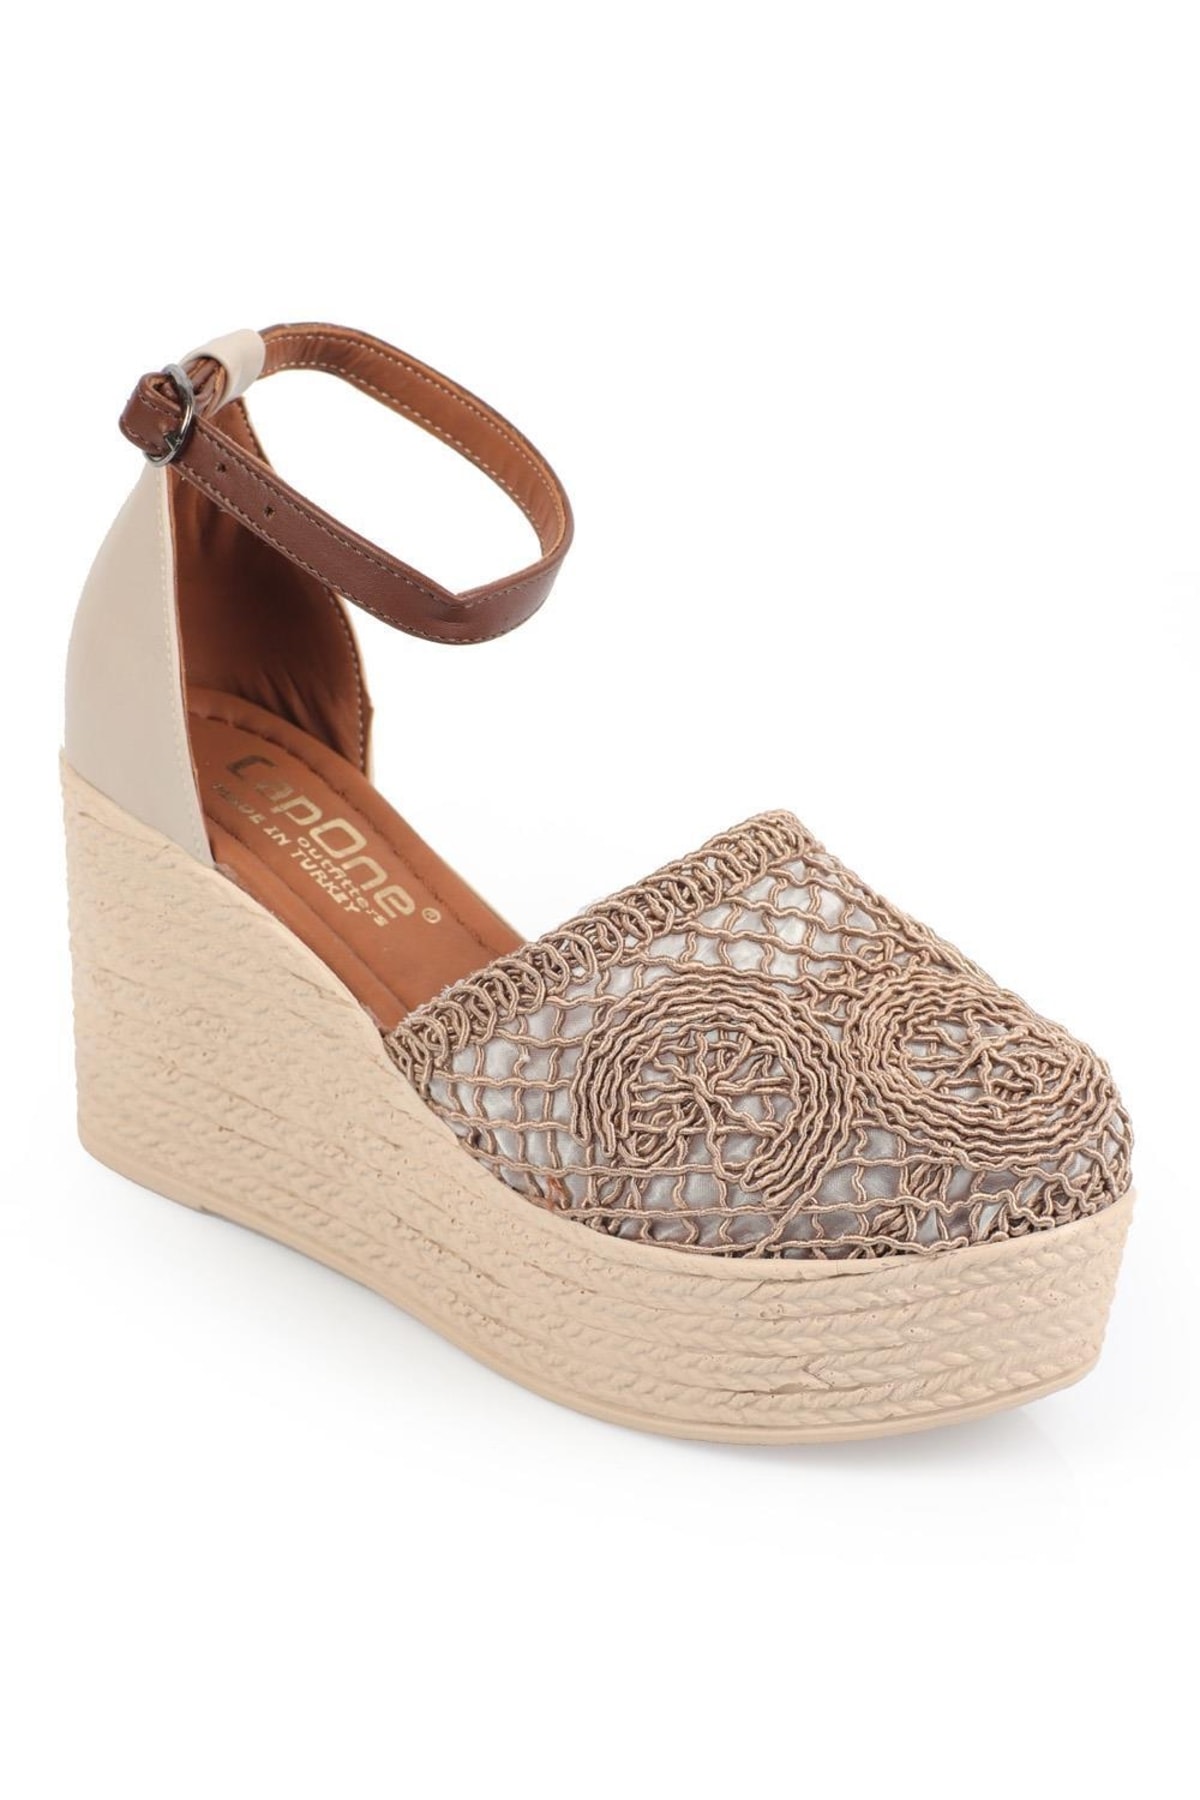 Capone Outfitters Capone Women's Wedge Heel Sandals with Lace Ankle Band Braided